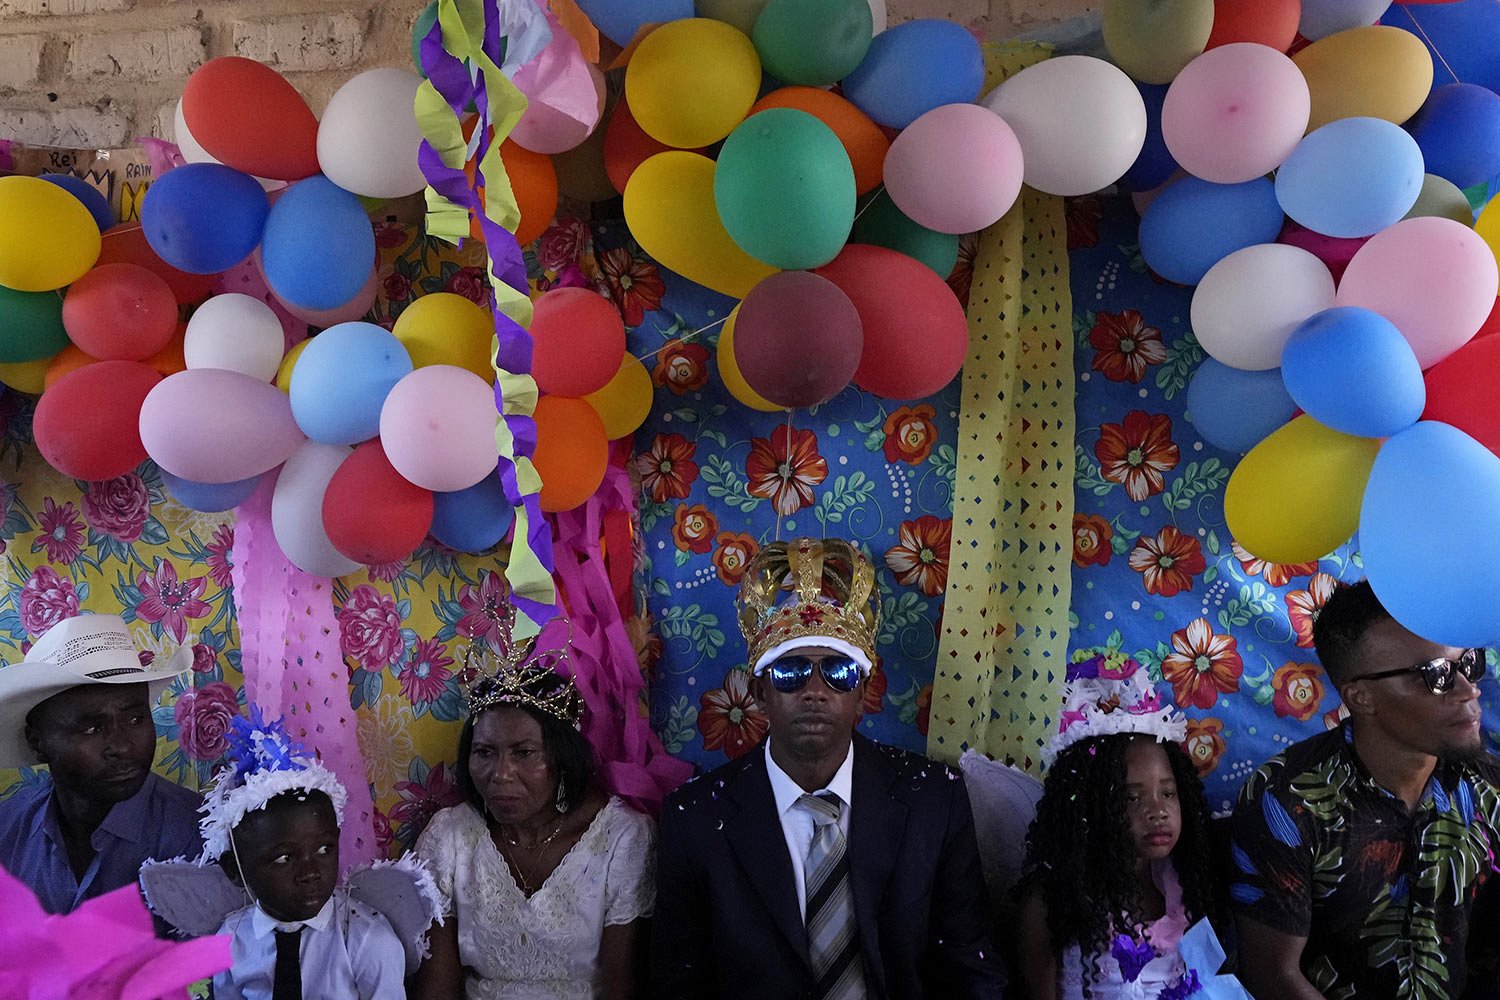  Adonildes da Cunha, center right, sits with Nilda dos Santos as they wear their Emperor and Queen crowns after attending a religious Mass at the end of a week-long pilgrimage honoring the patron saint in Cavalcante, Goias state, Brazil, Aug. 15, 202